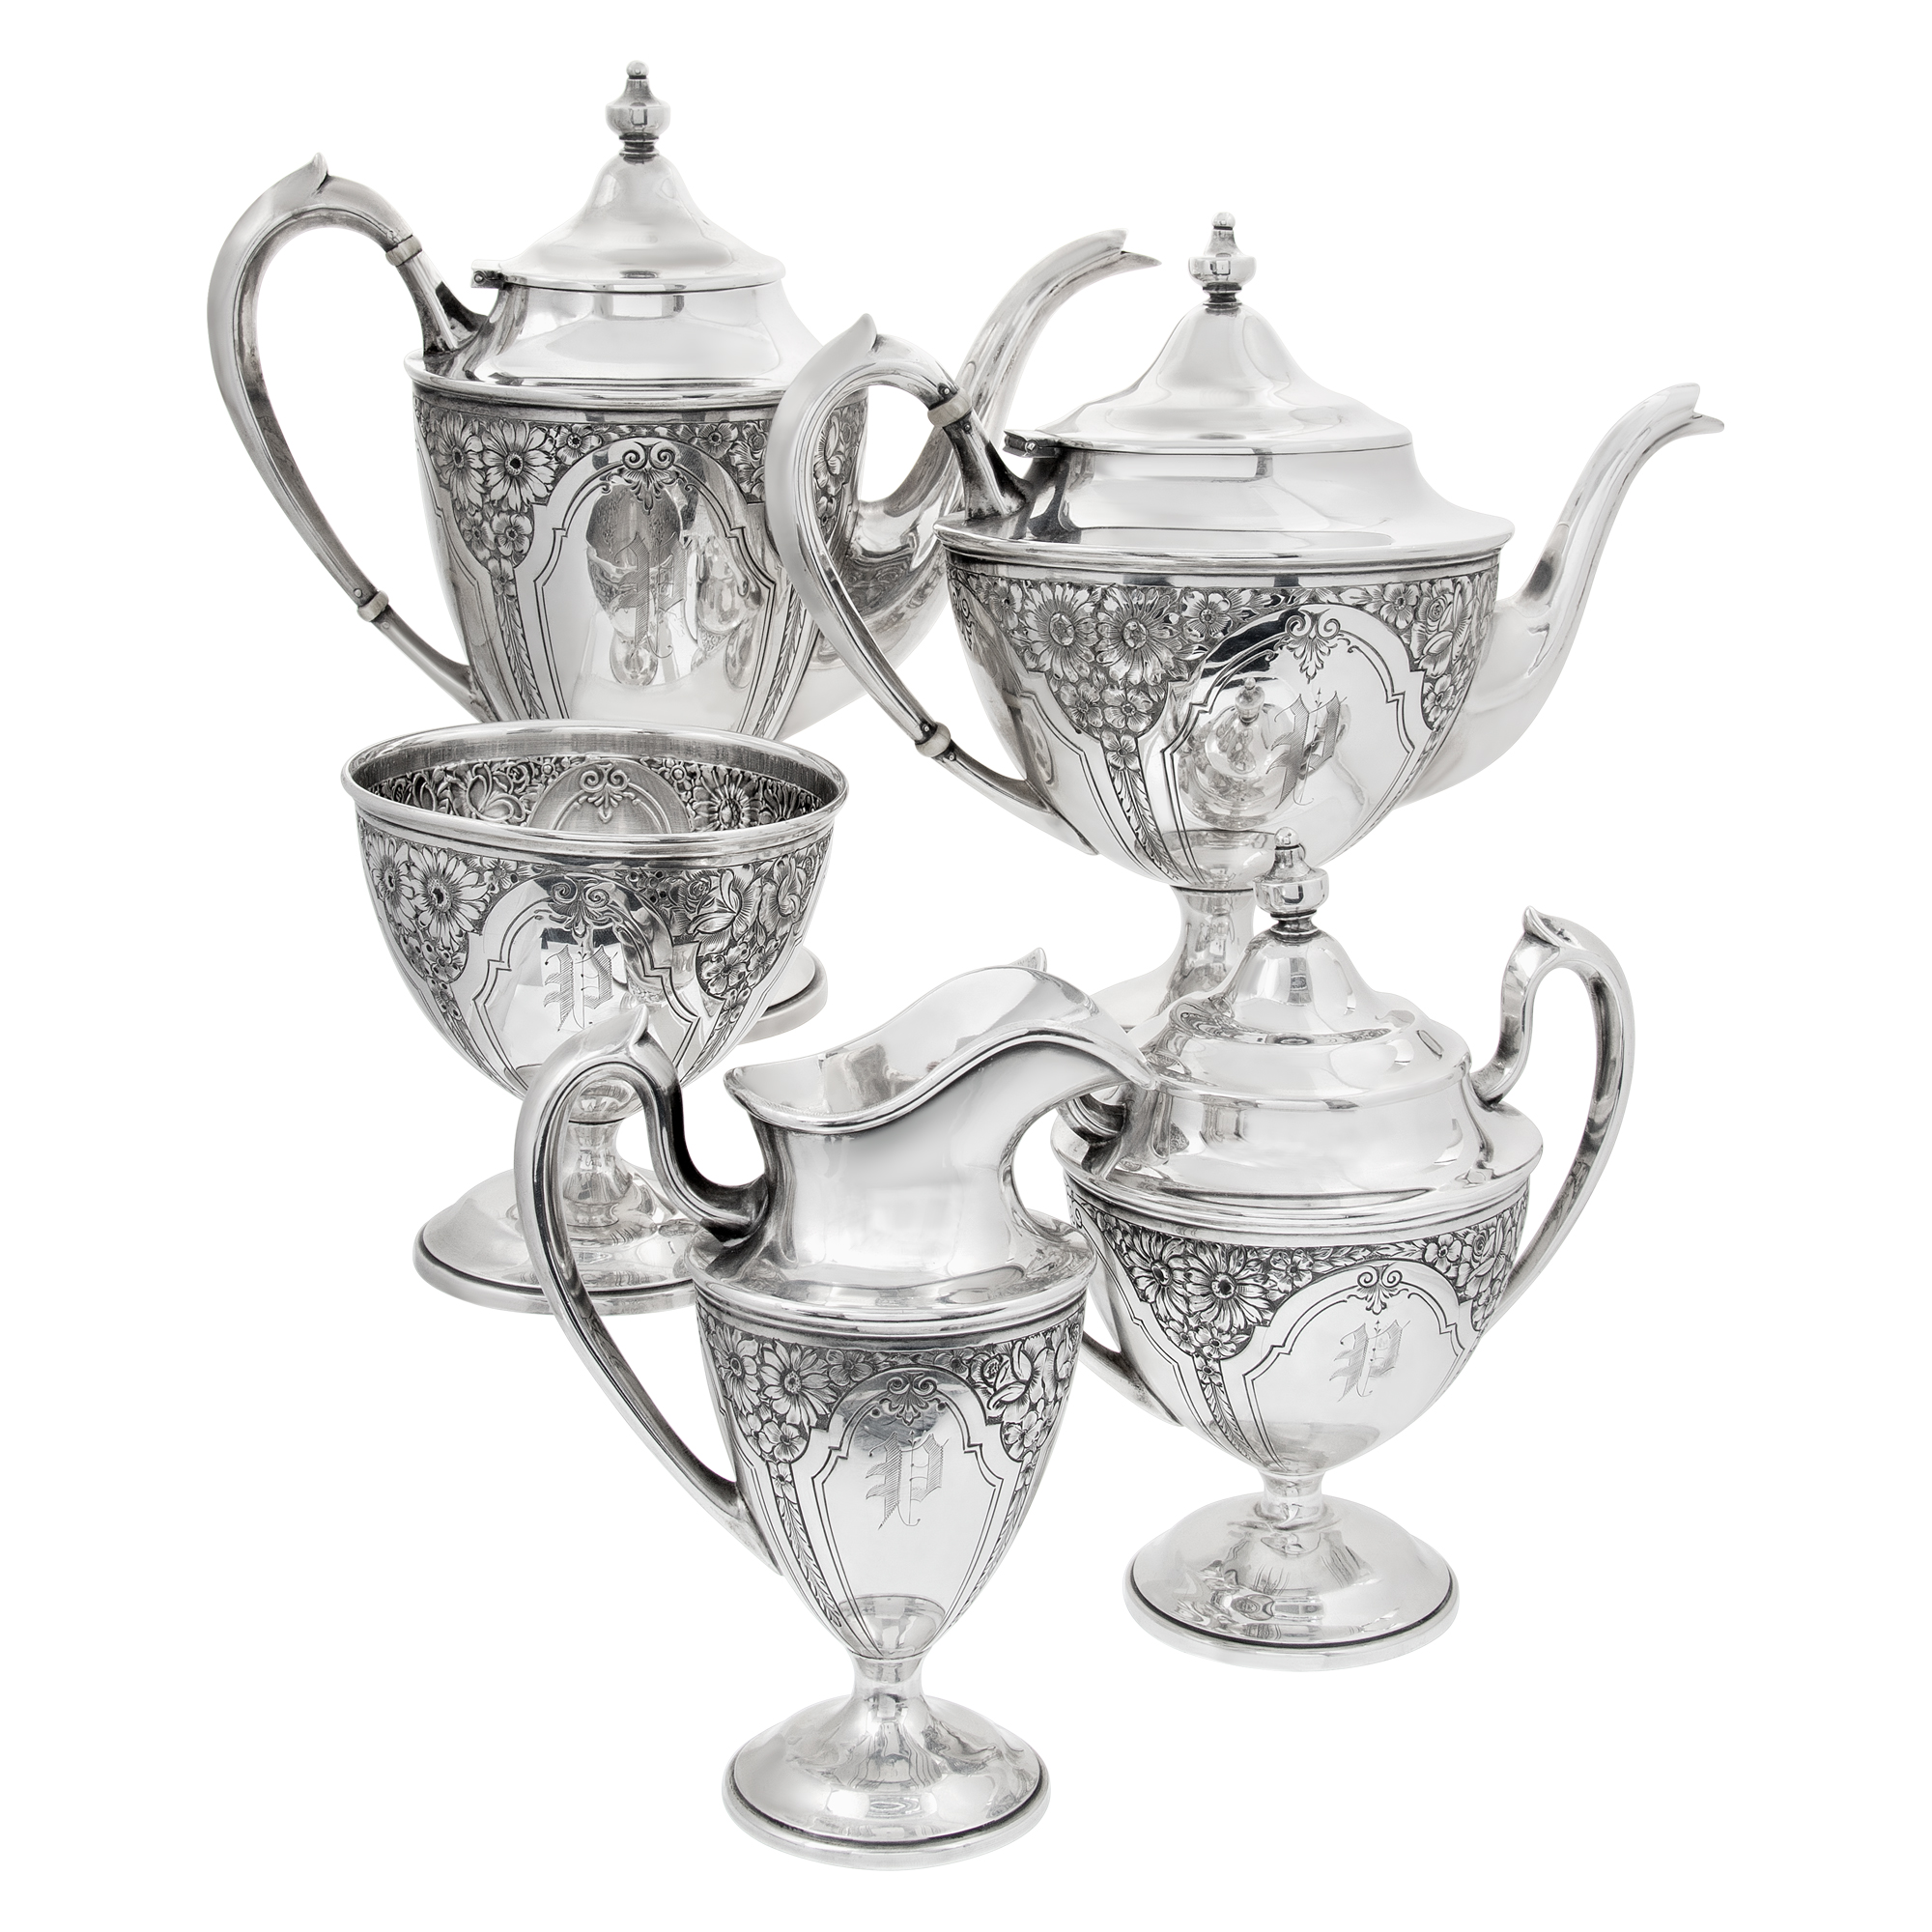 Sterling Silver 5 pieces tea/coffee set with Repousse flowers decor.